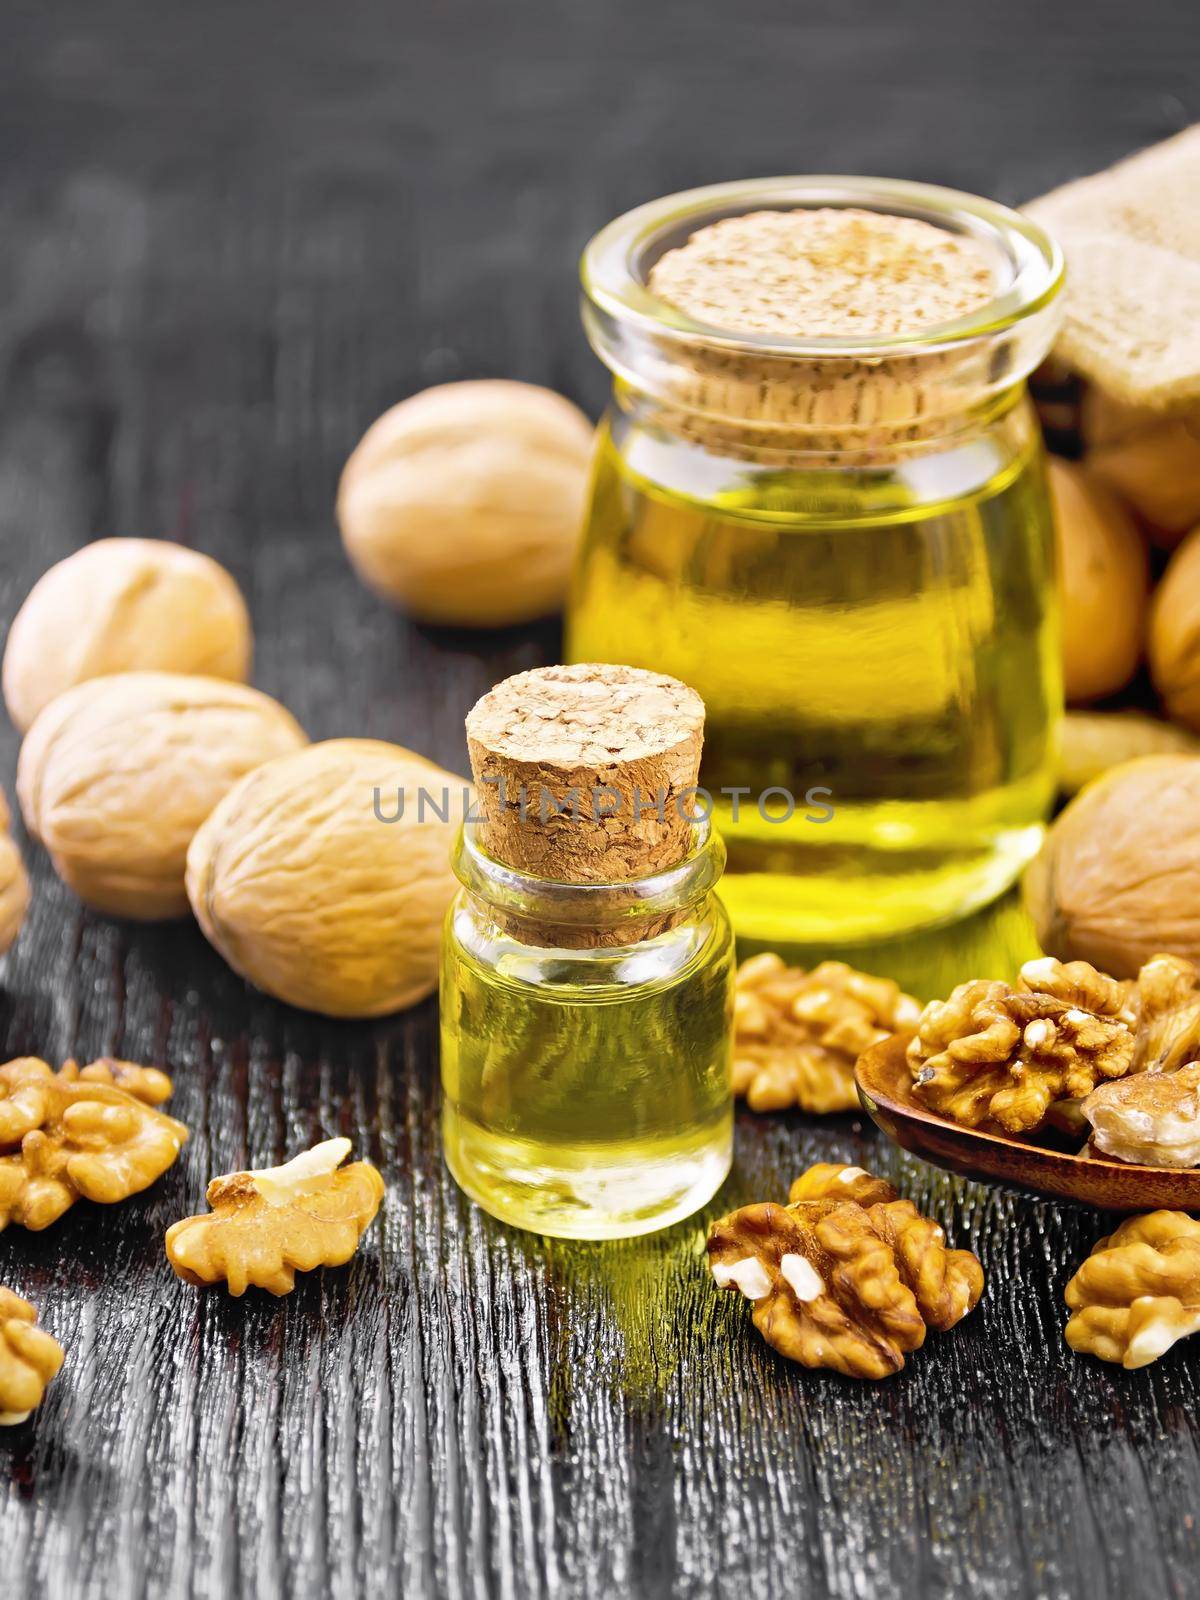 Walnut oil in a glass bottle and a jar, nuts in bag, spoon and on table against black wooden board